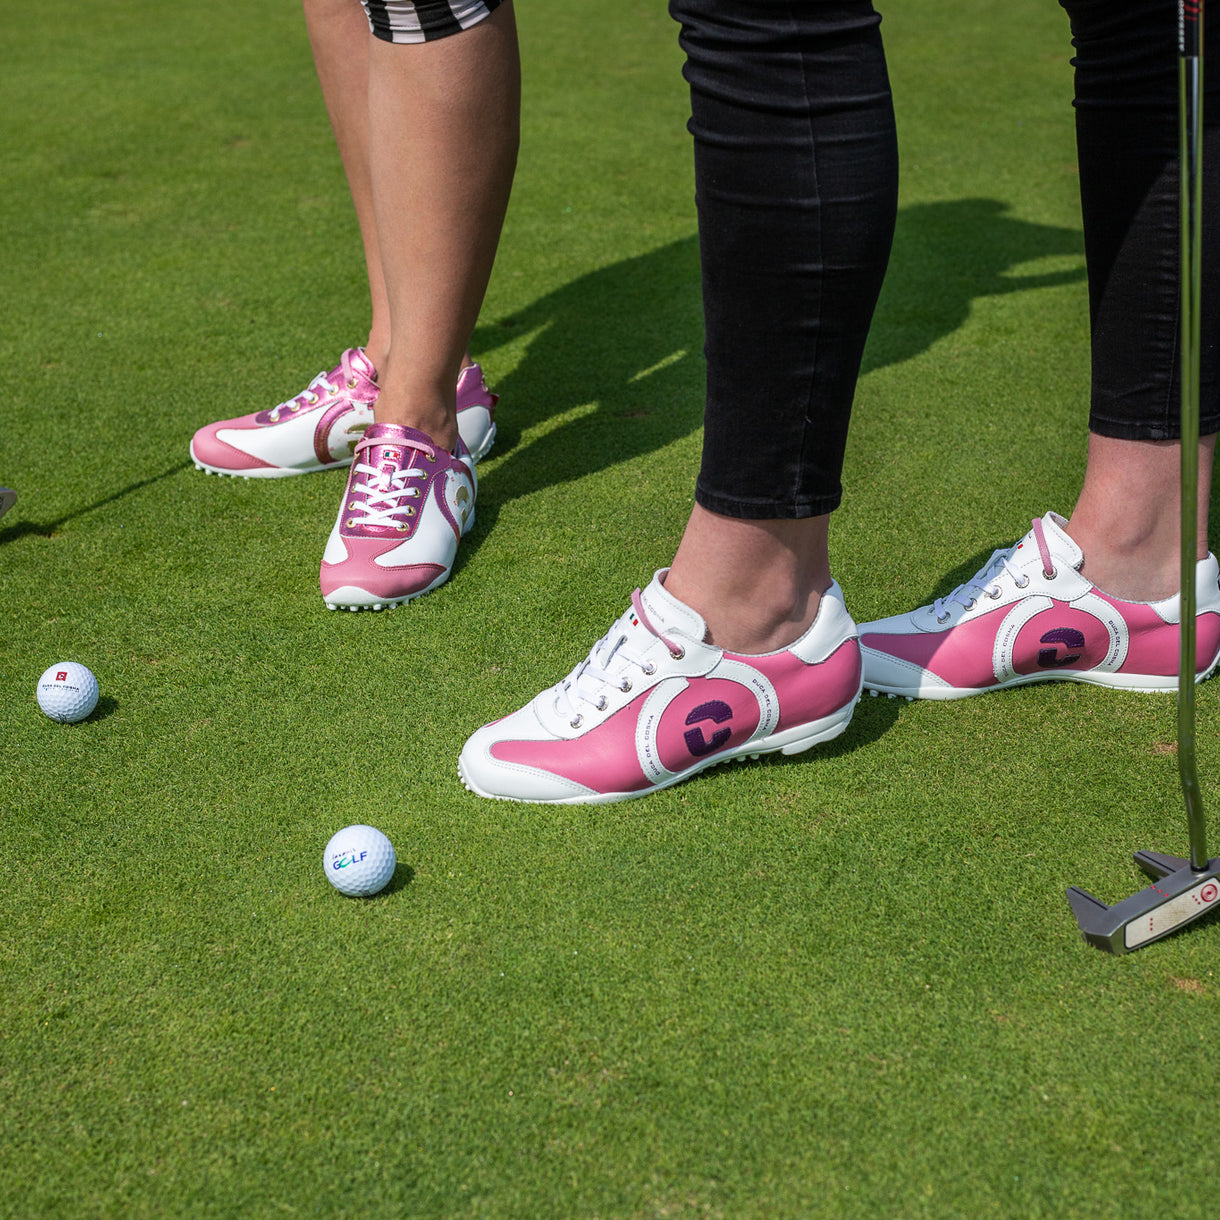 Golf fashion for ladies this summer